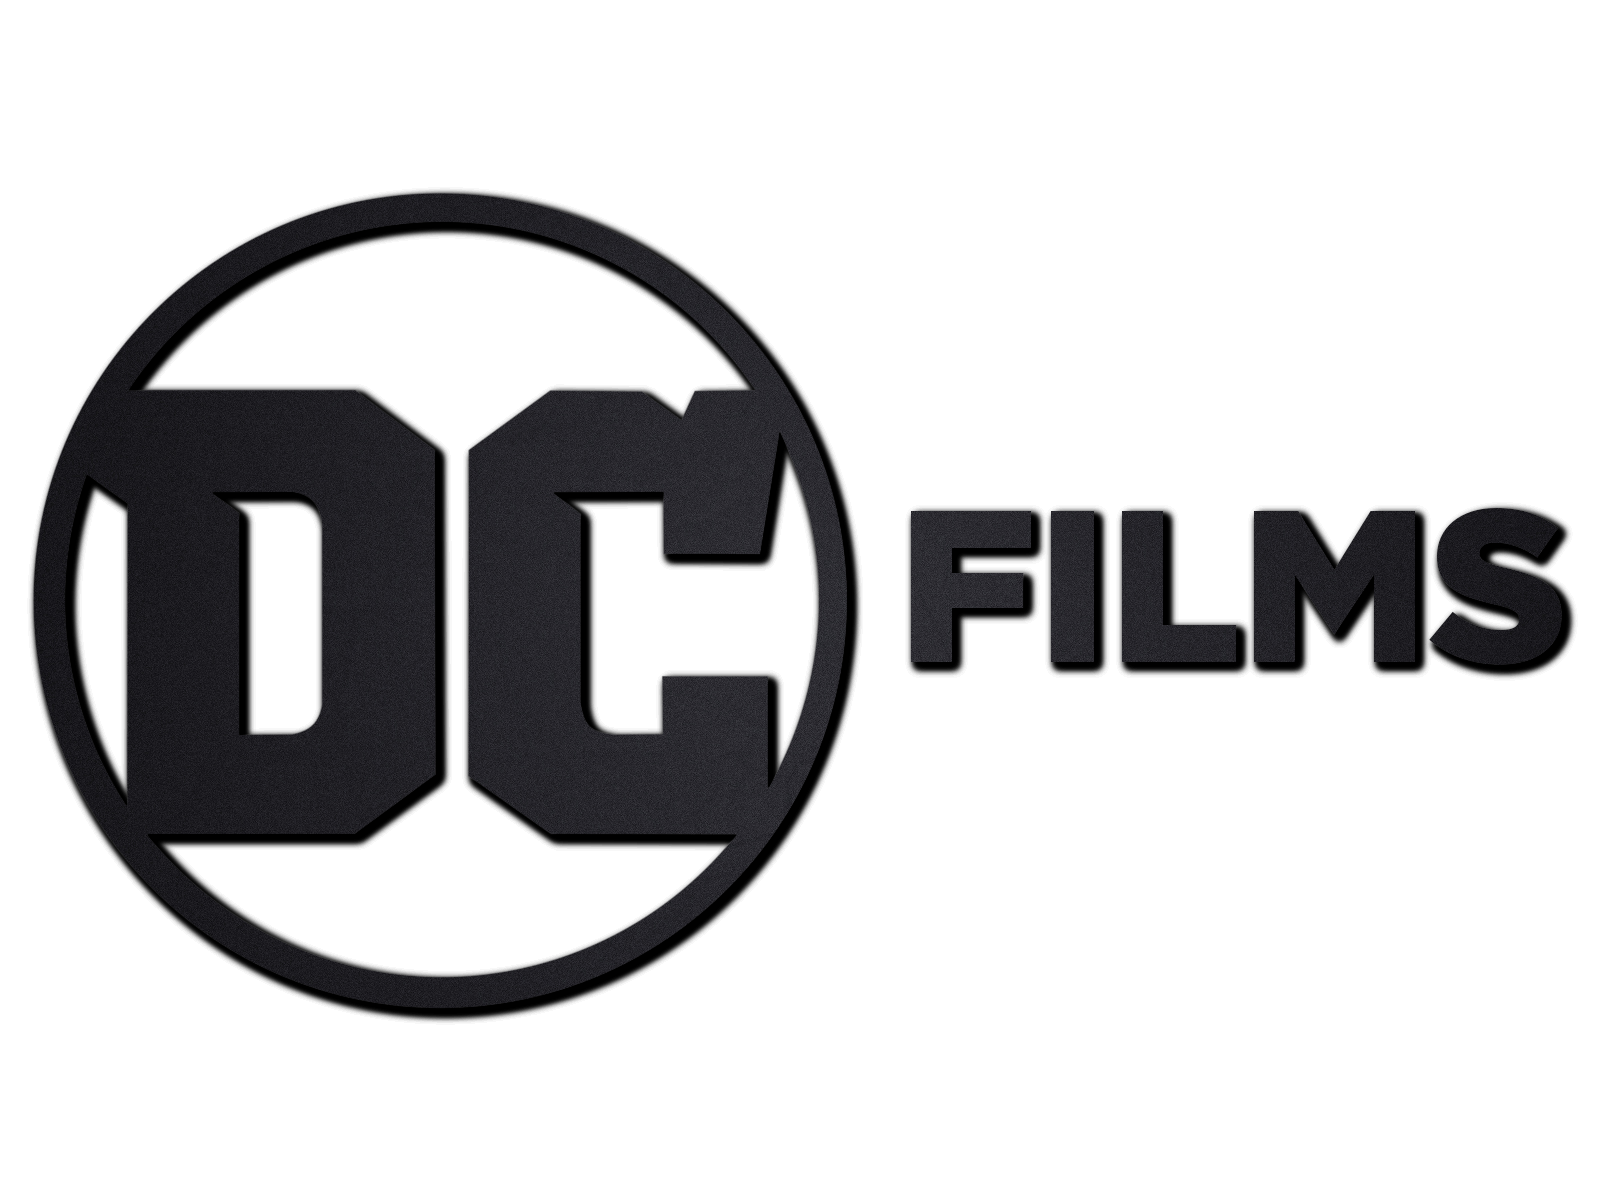 view tv series from DC Films